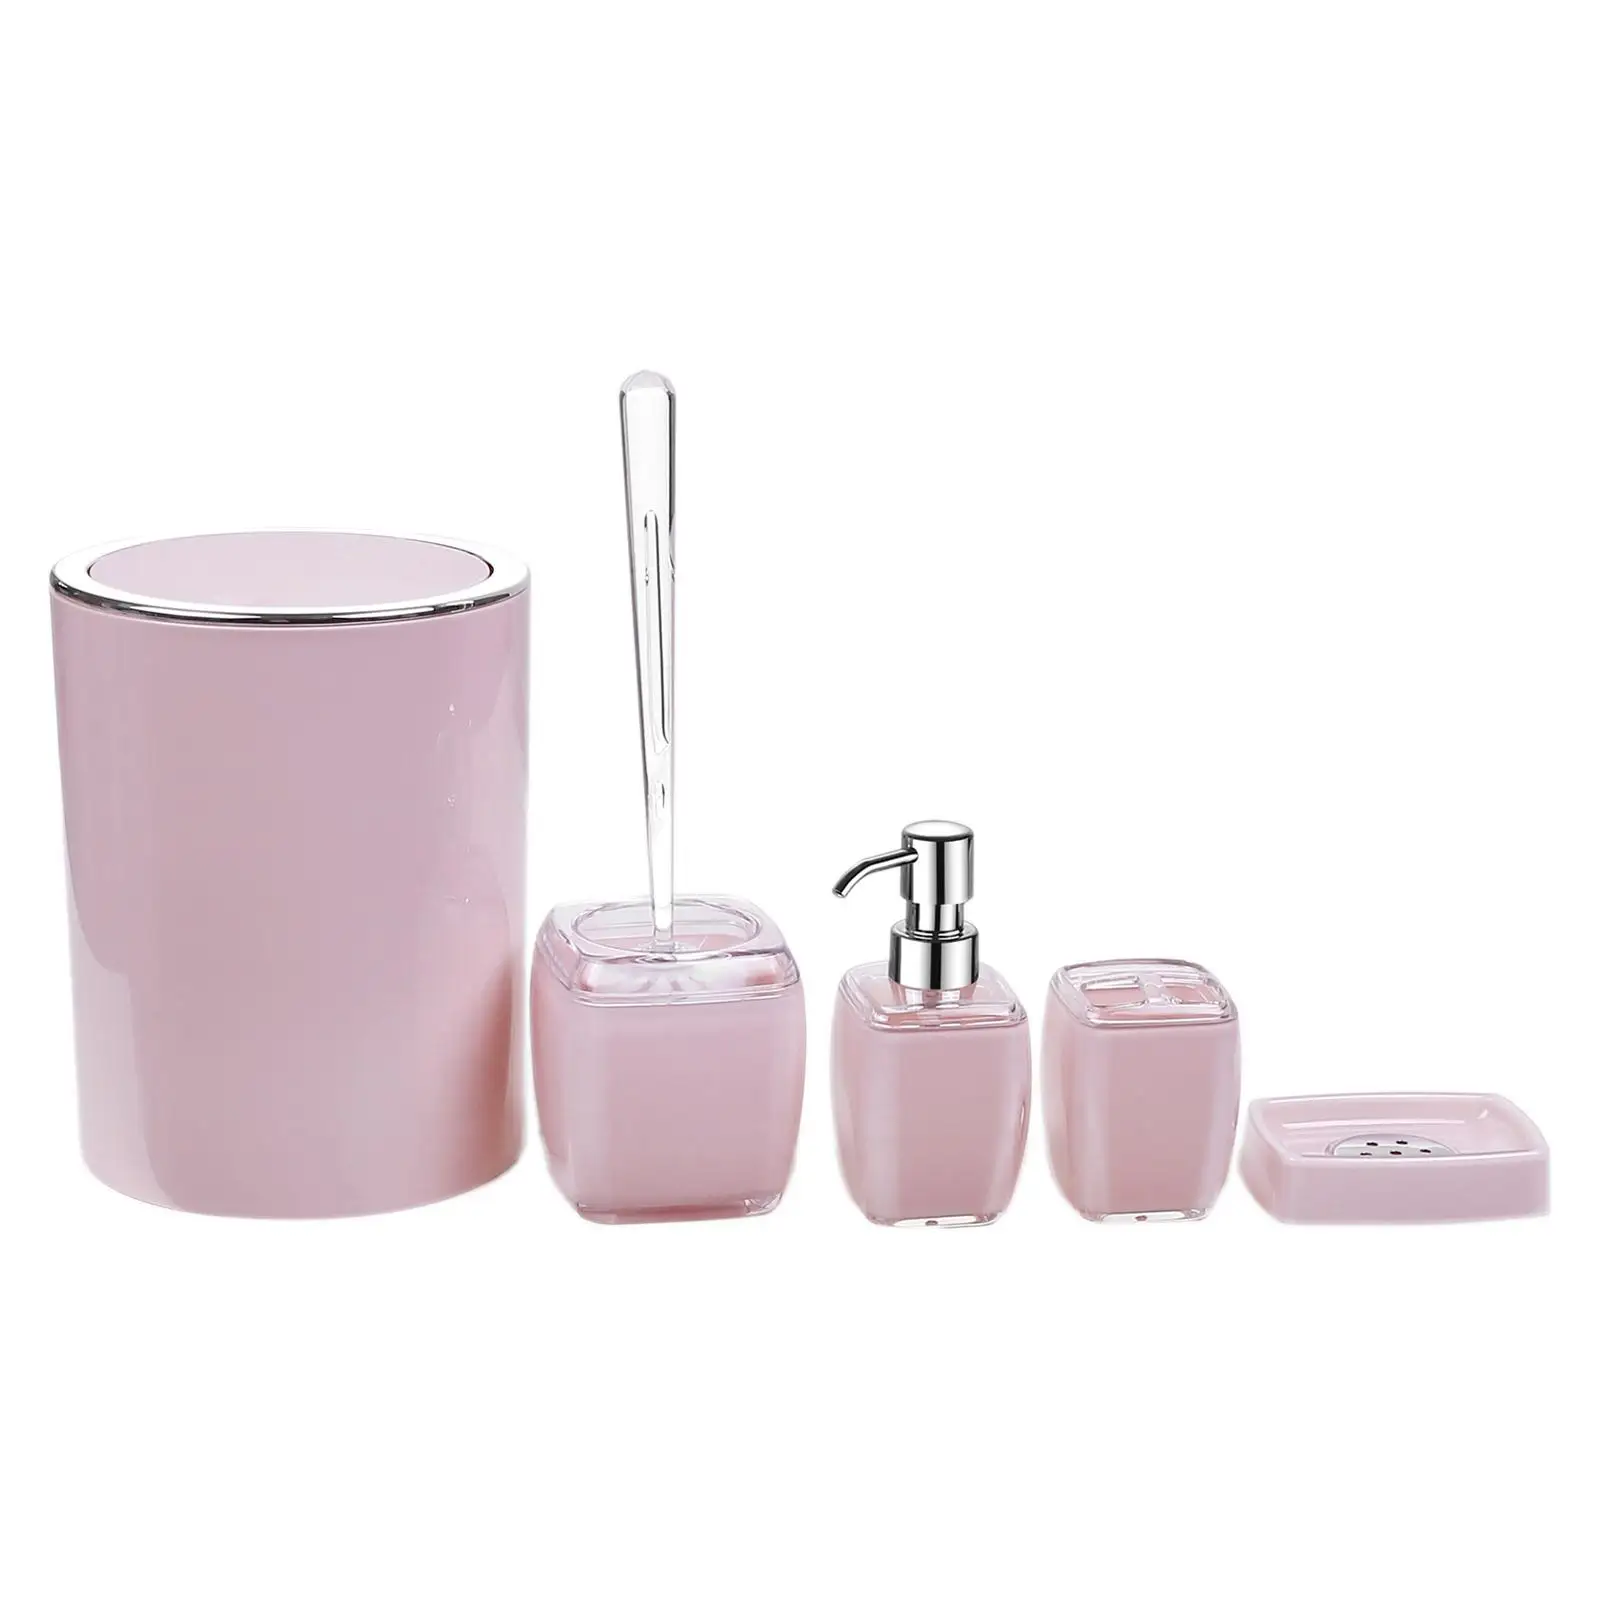 5x Acrylic Bathroom Set Accessories Toothbrush Holder Soap Dish Bottle Toilet Brush for Home ,Hotel Apartment Housewarming Gift